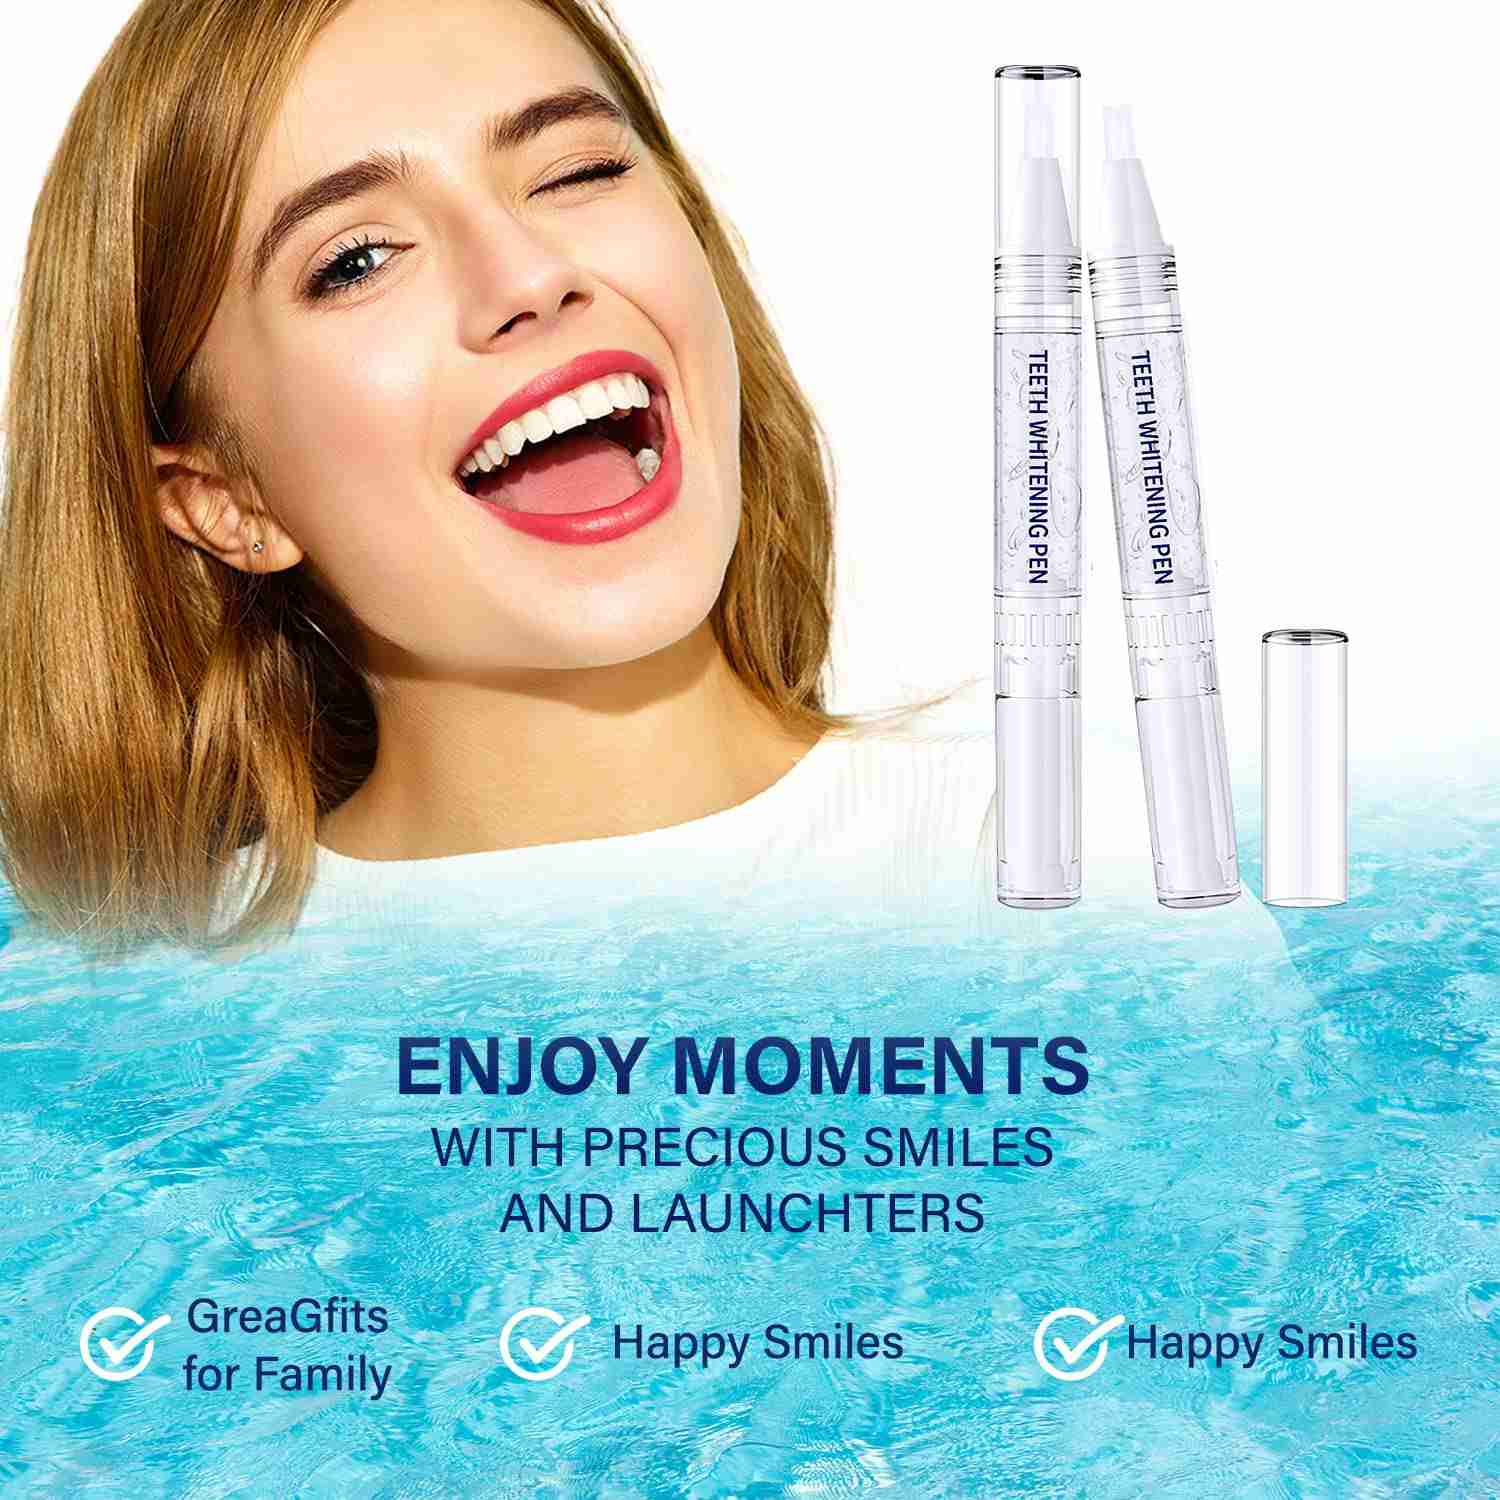 teeth-whitening-pen-2pcs with discount code